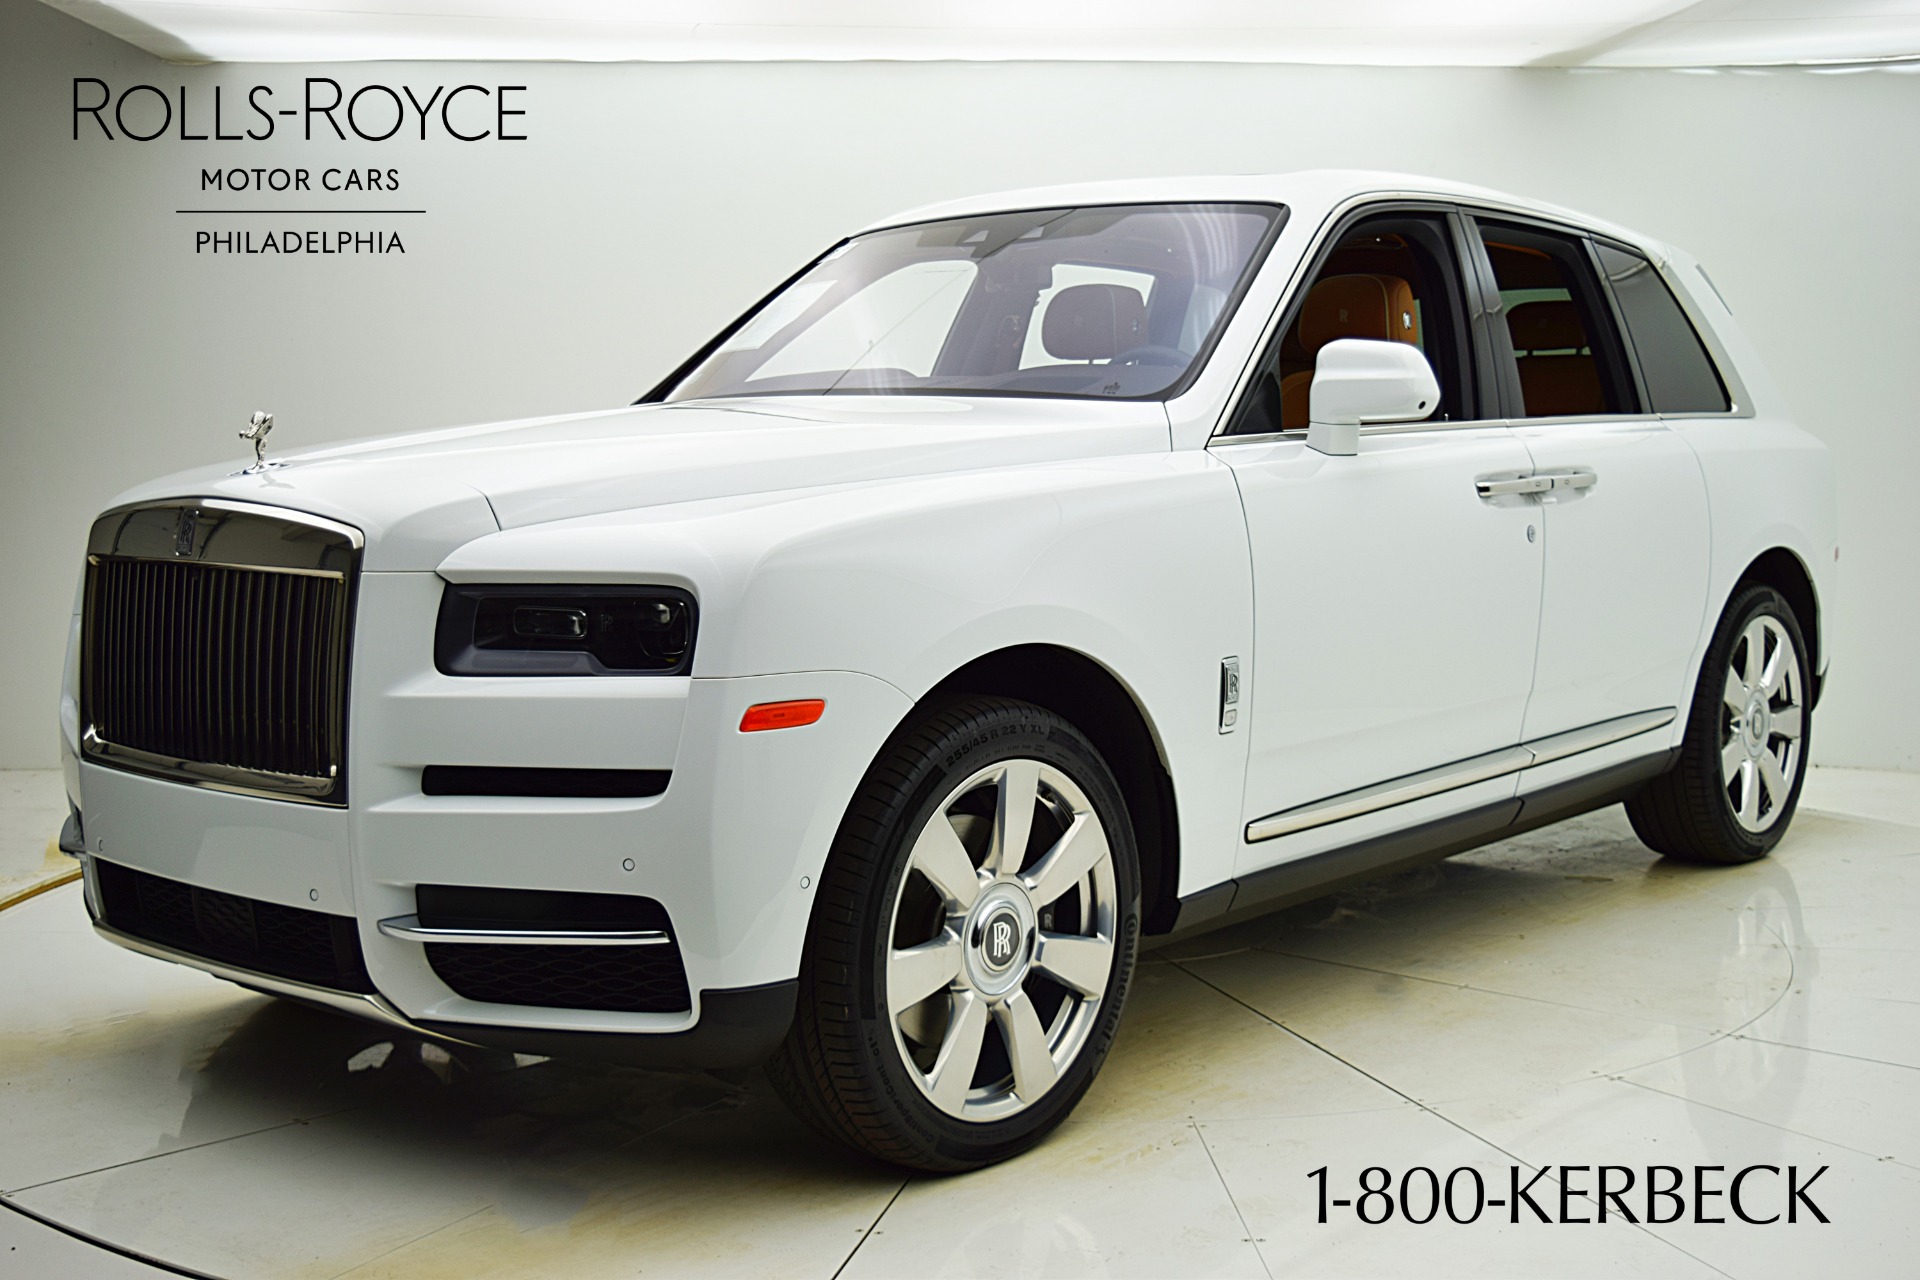 Used 2020 Rolls-Royce Cullinan / ORIGINAL PRICE $339,000 NOW PRICE $329,000 UNTIL JANUARY 31st for sale Sold at Bentley Palmyra N.J. in Palmyra NJ 08065 2